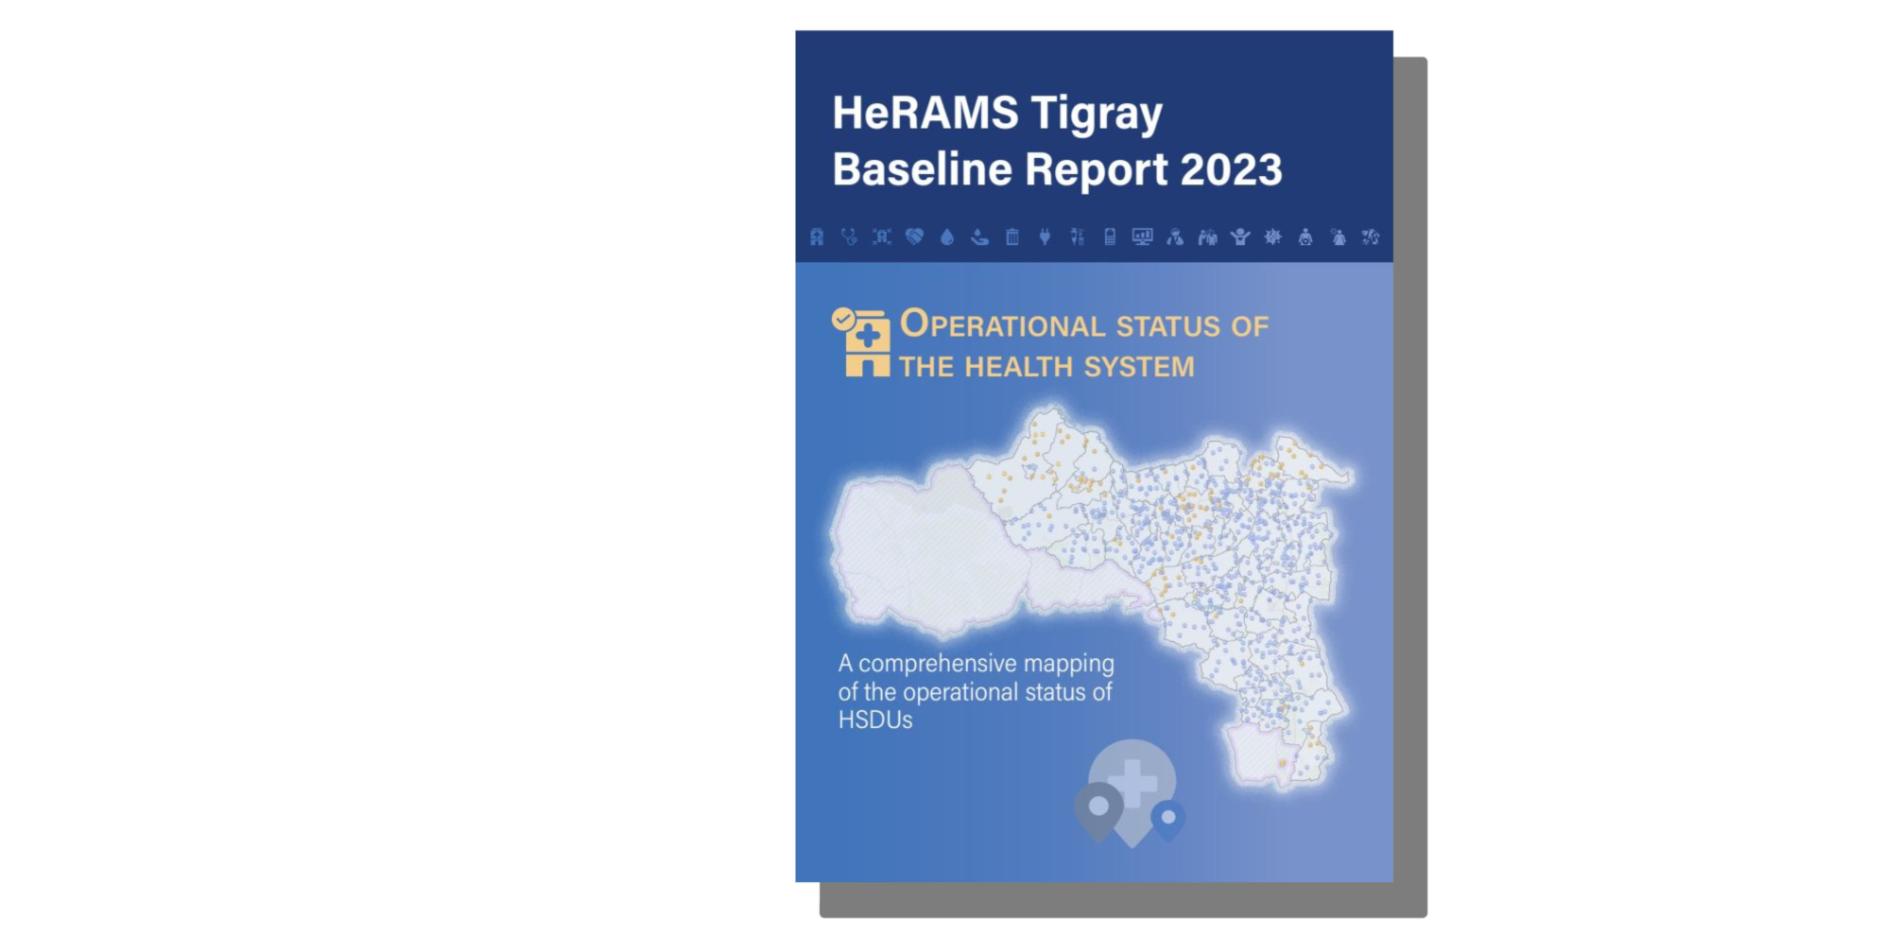 HeRAMS Tigray Baseline Report 2023: Operational status of the health system